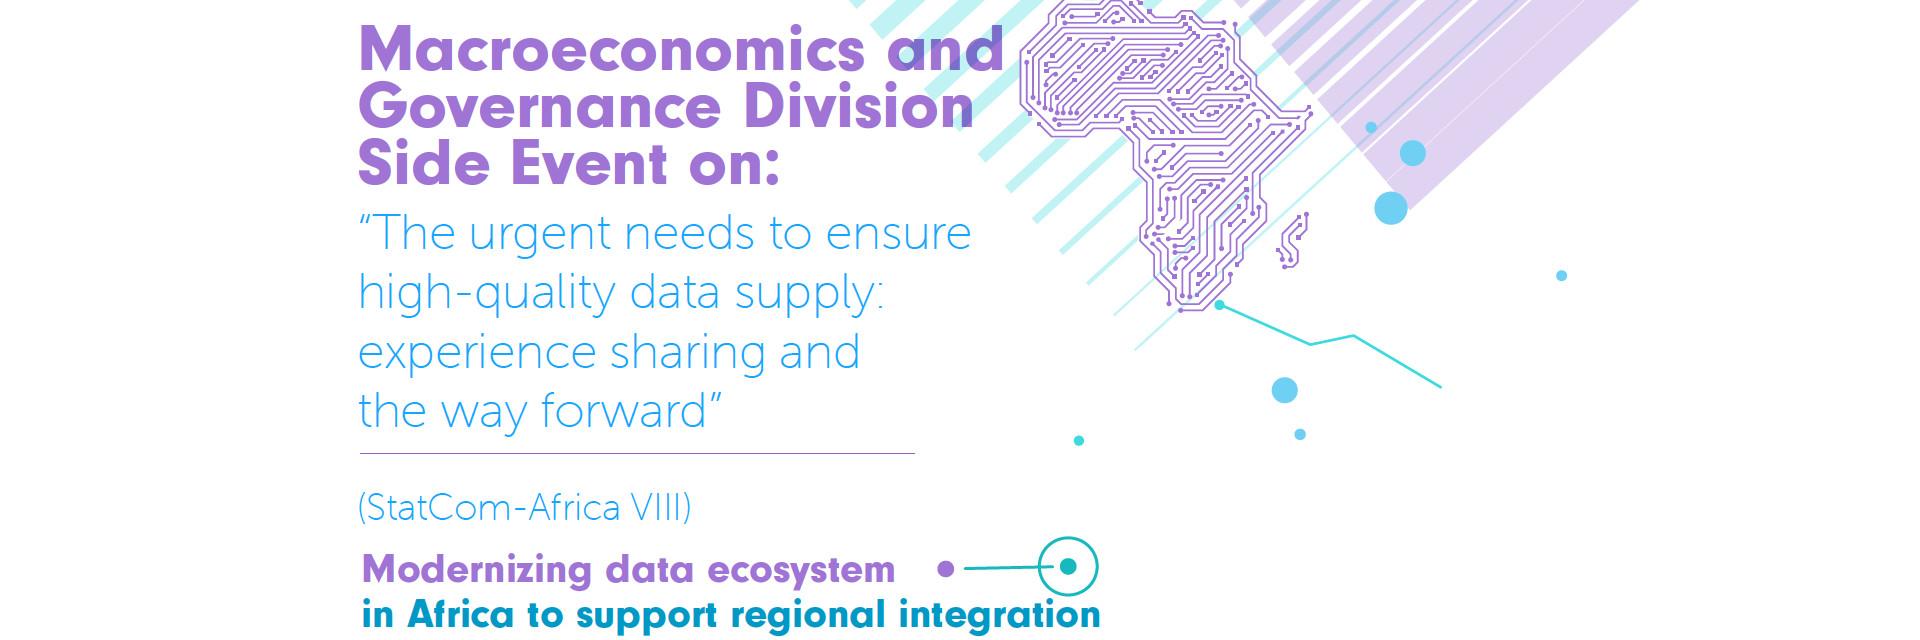 Side event on "The urgent needs to ensure high-quality data supply"